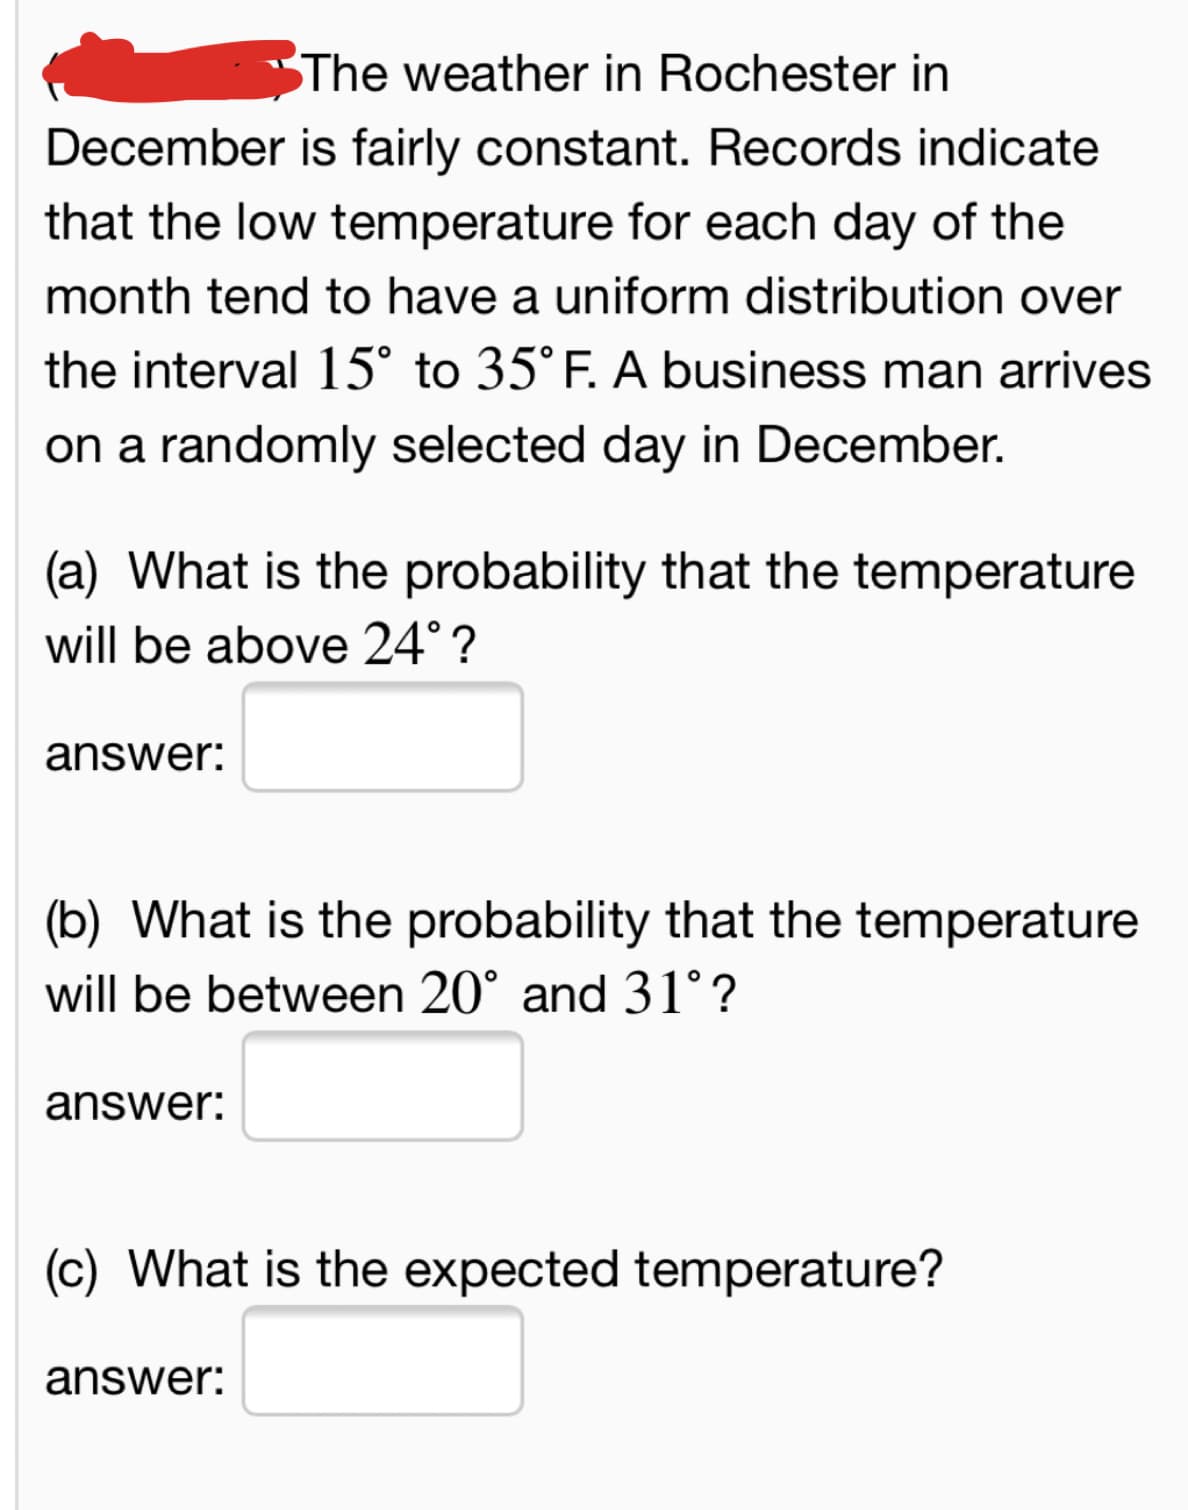 The weather in Rochester in
December is fairly constant. Records indicate
that the low temperature for each day of the
month tend to have a uniform distribution over
the interval 15° to 35°F. A business man arrives
on a randomly selected day in December.
(a) What is the probability that the temperature
will be above 24° ?
answer:
(b) What is the probability that the temperatu
will be between 20° and 31° ?
answer:
(c) What is the expected temperature?
answer:
